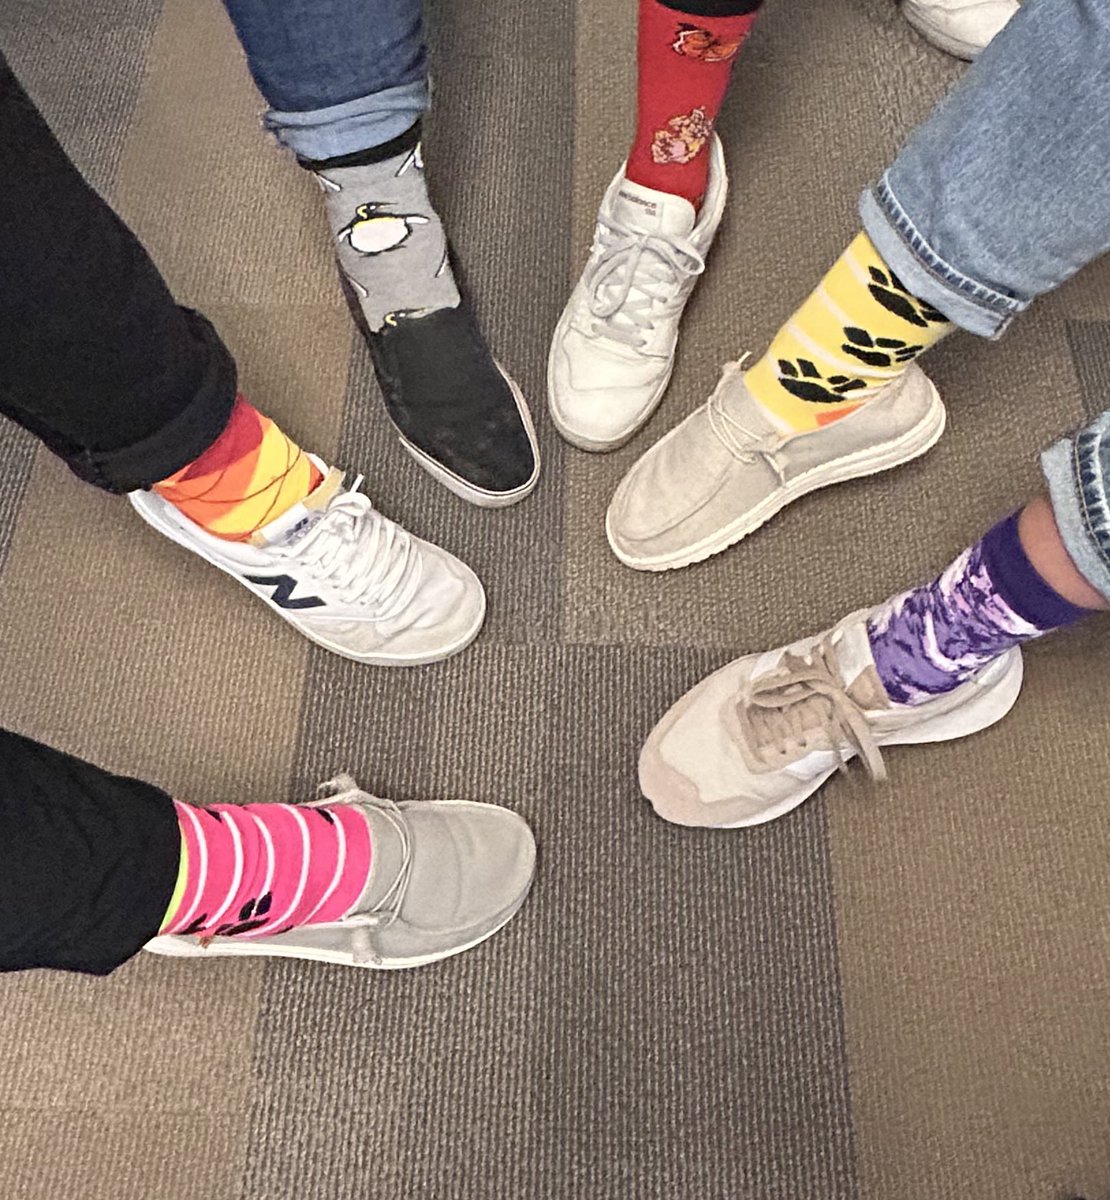 I spy some of our second year #UNMCGeneticCounseling students rocking their socks in support of #WorldDownSyndromeDay @unmccahp @unmc_mmi @DSAMidlands